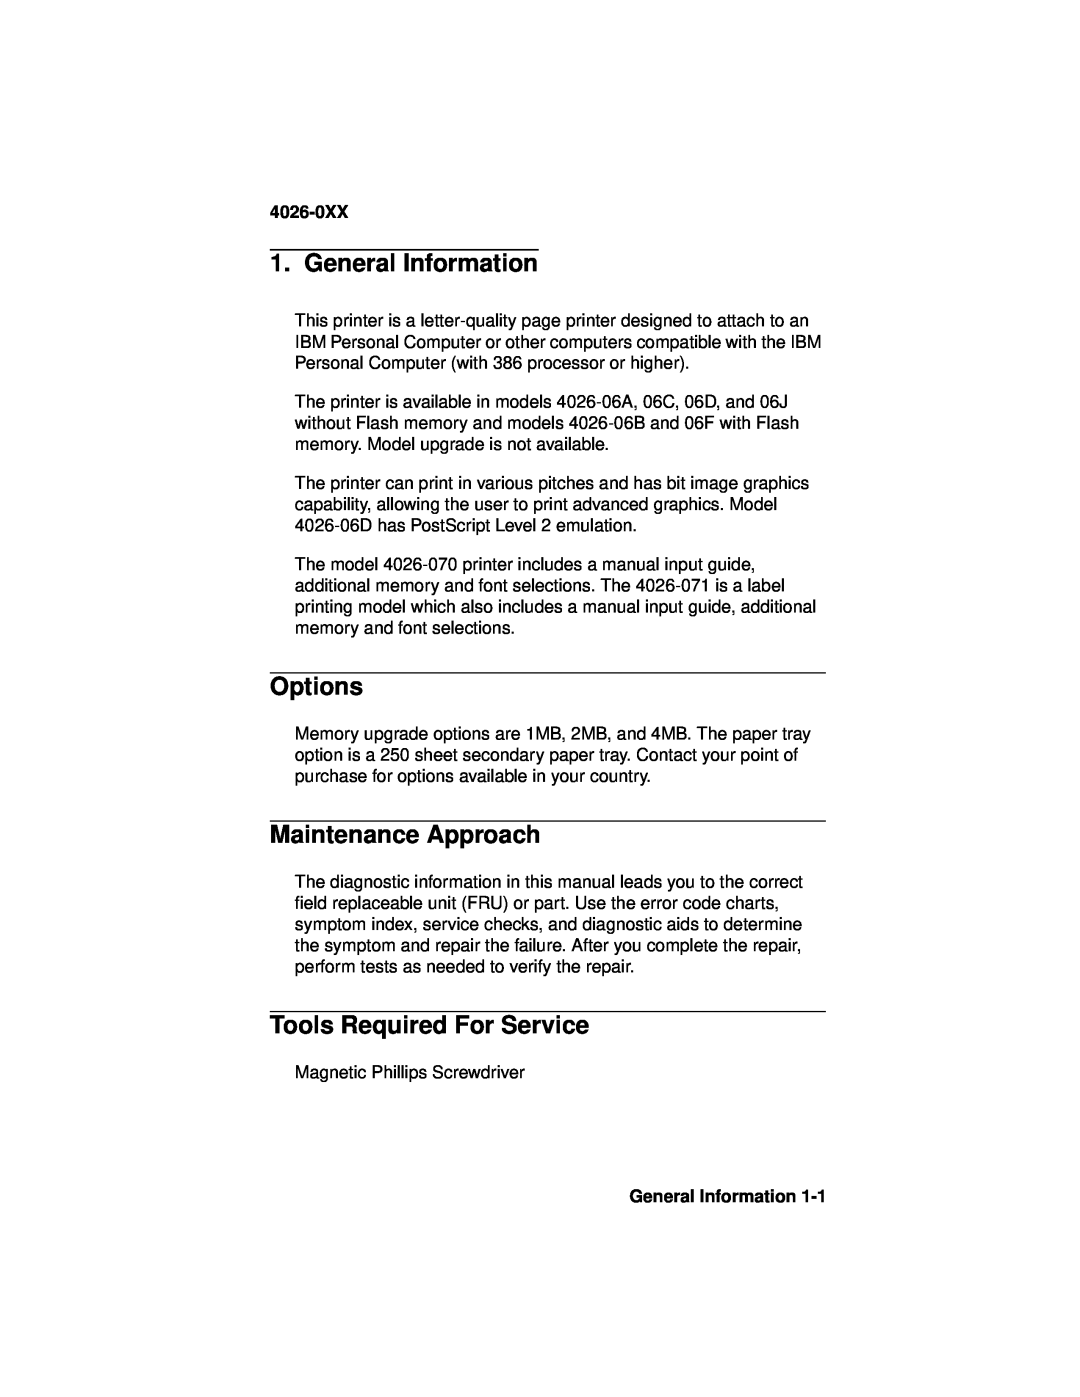 Lexmark 4026-0XX manual General Information, Options, Maintenance Approach, Tools Required For Service 